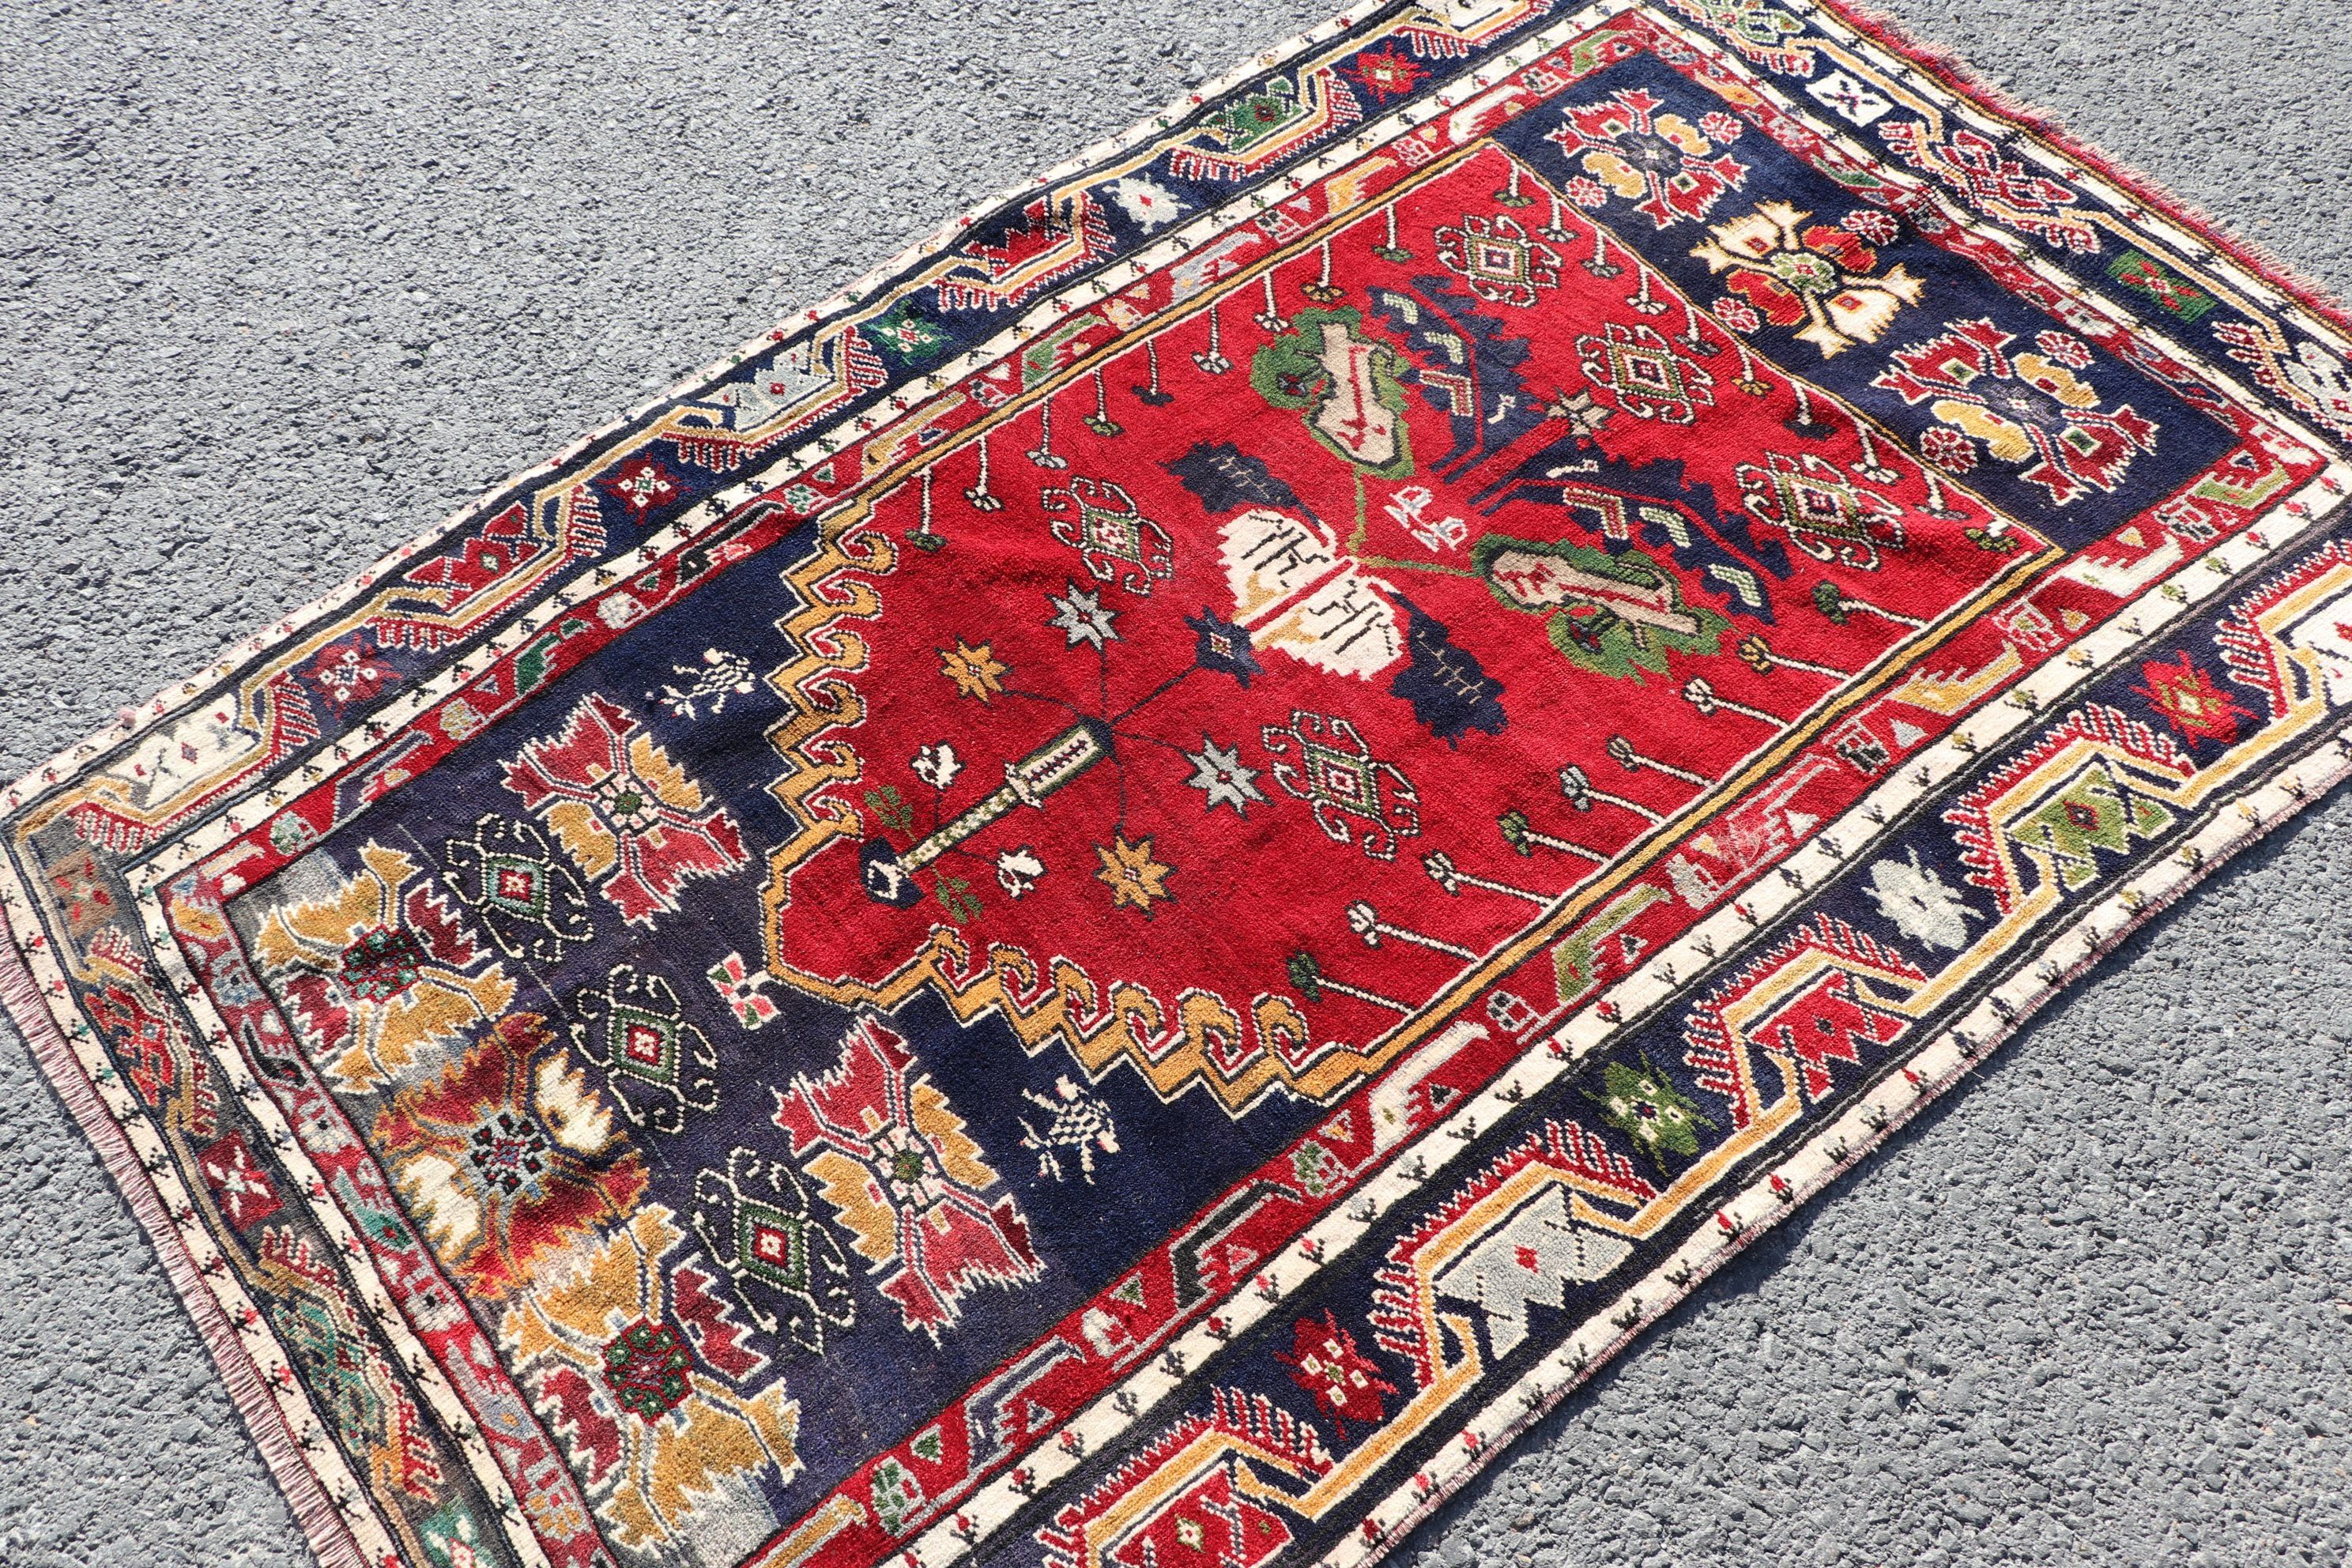 Antique Rug, Rugs for Entry, Red Moroccan Rugs, Turkish Rugs, 3.6x6 ft Accent Rug, Bedroom Rug, Vintage Rug, Nursery Rugs